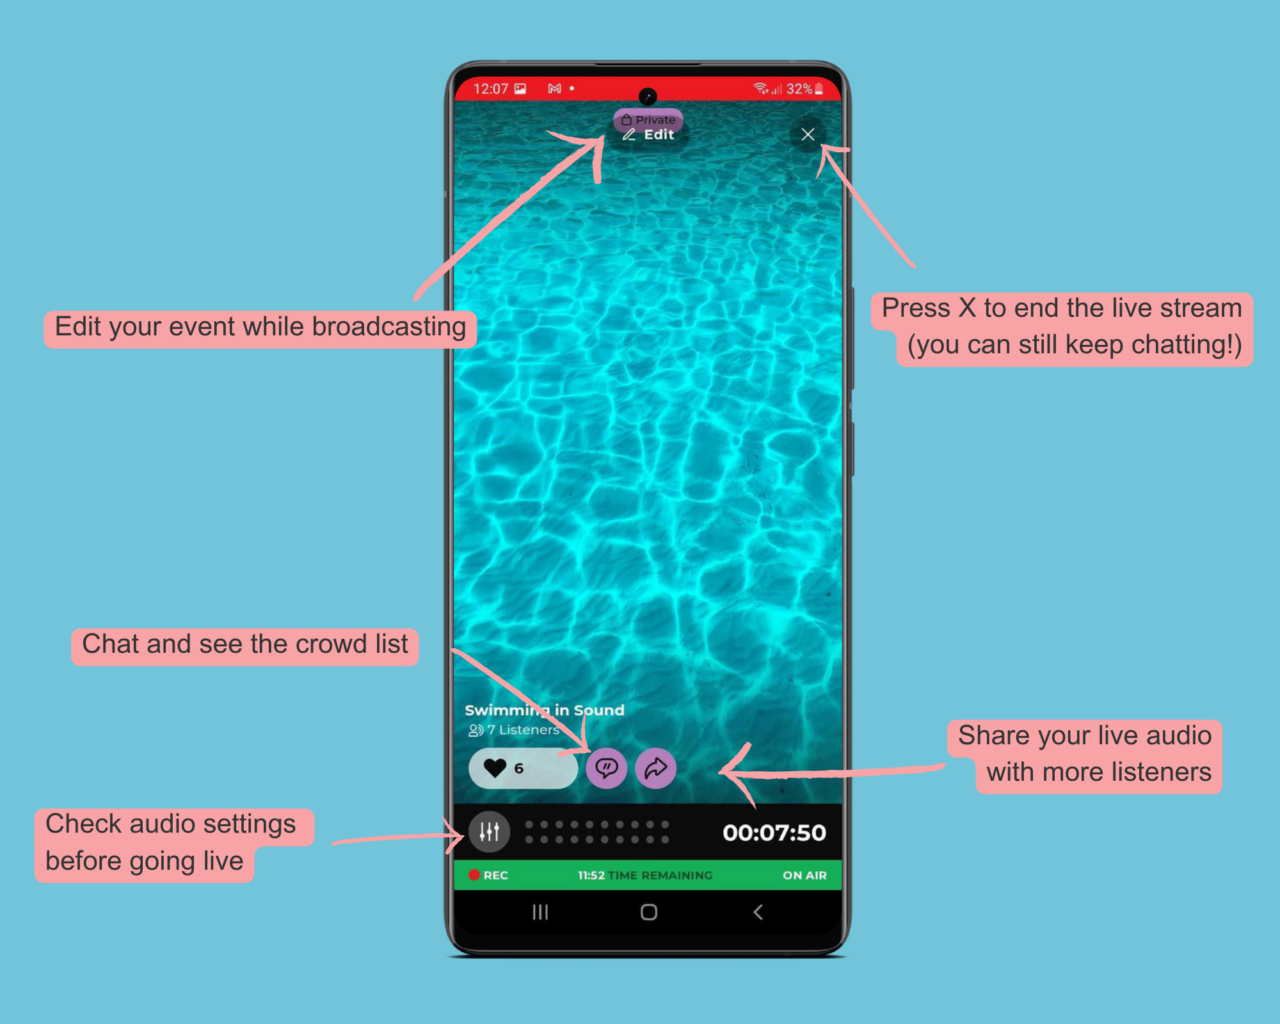 Arrows highlighting the different parts of the Android Creators app's broadcast screen. The pencil icon lets you edit a live event; The "x" ends a live stream (but you can still keep chatting); the speech bubble pulls up the chat window, where you can also toggle back and forth between the chat and list of listeners; the audio settings icon is accessible on the broadcast screen before starting a live event; and the arrow enables you to share your live audio event with more listeners.